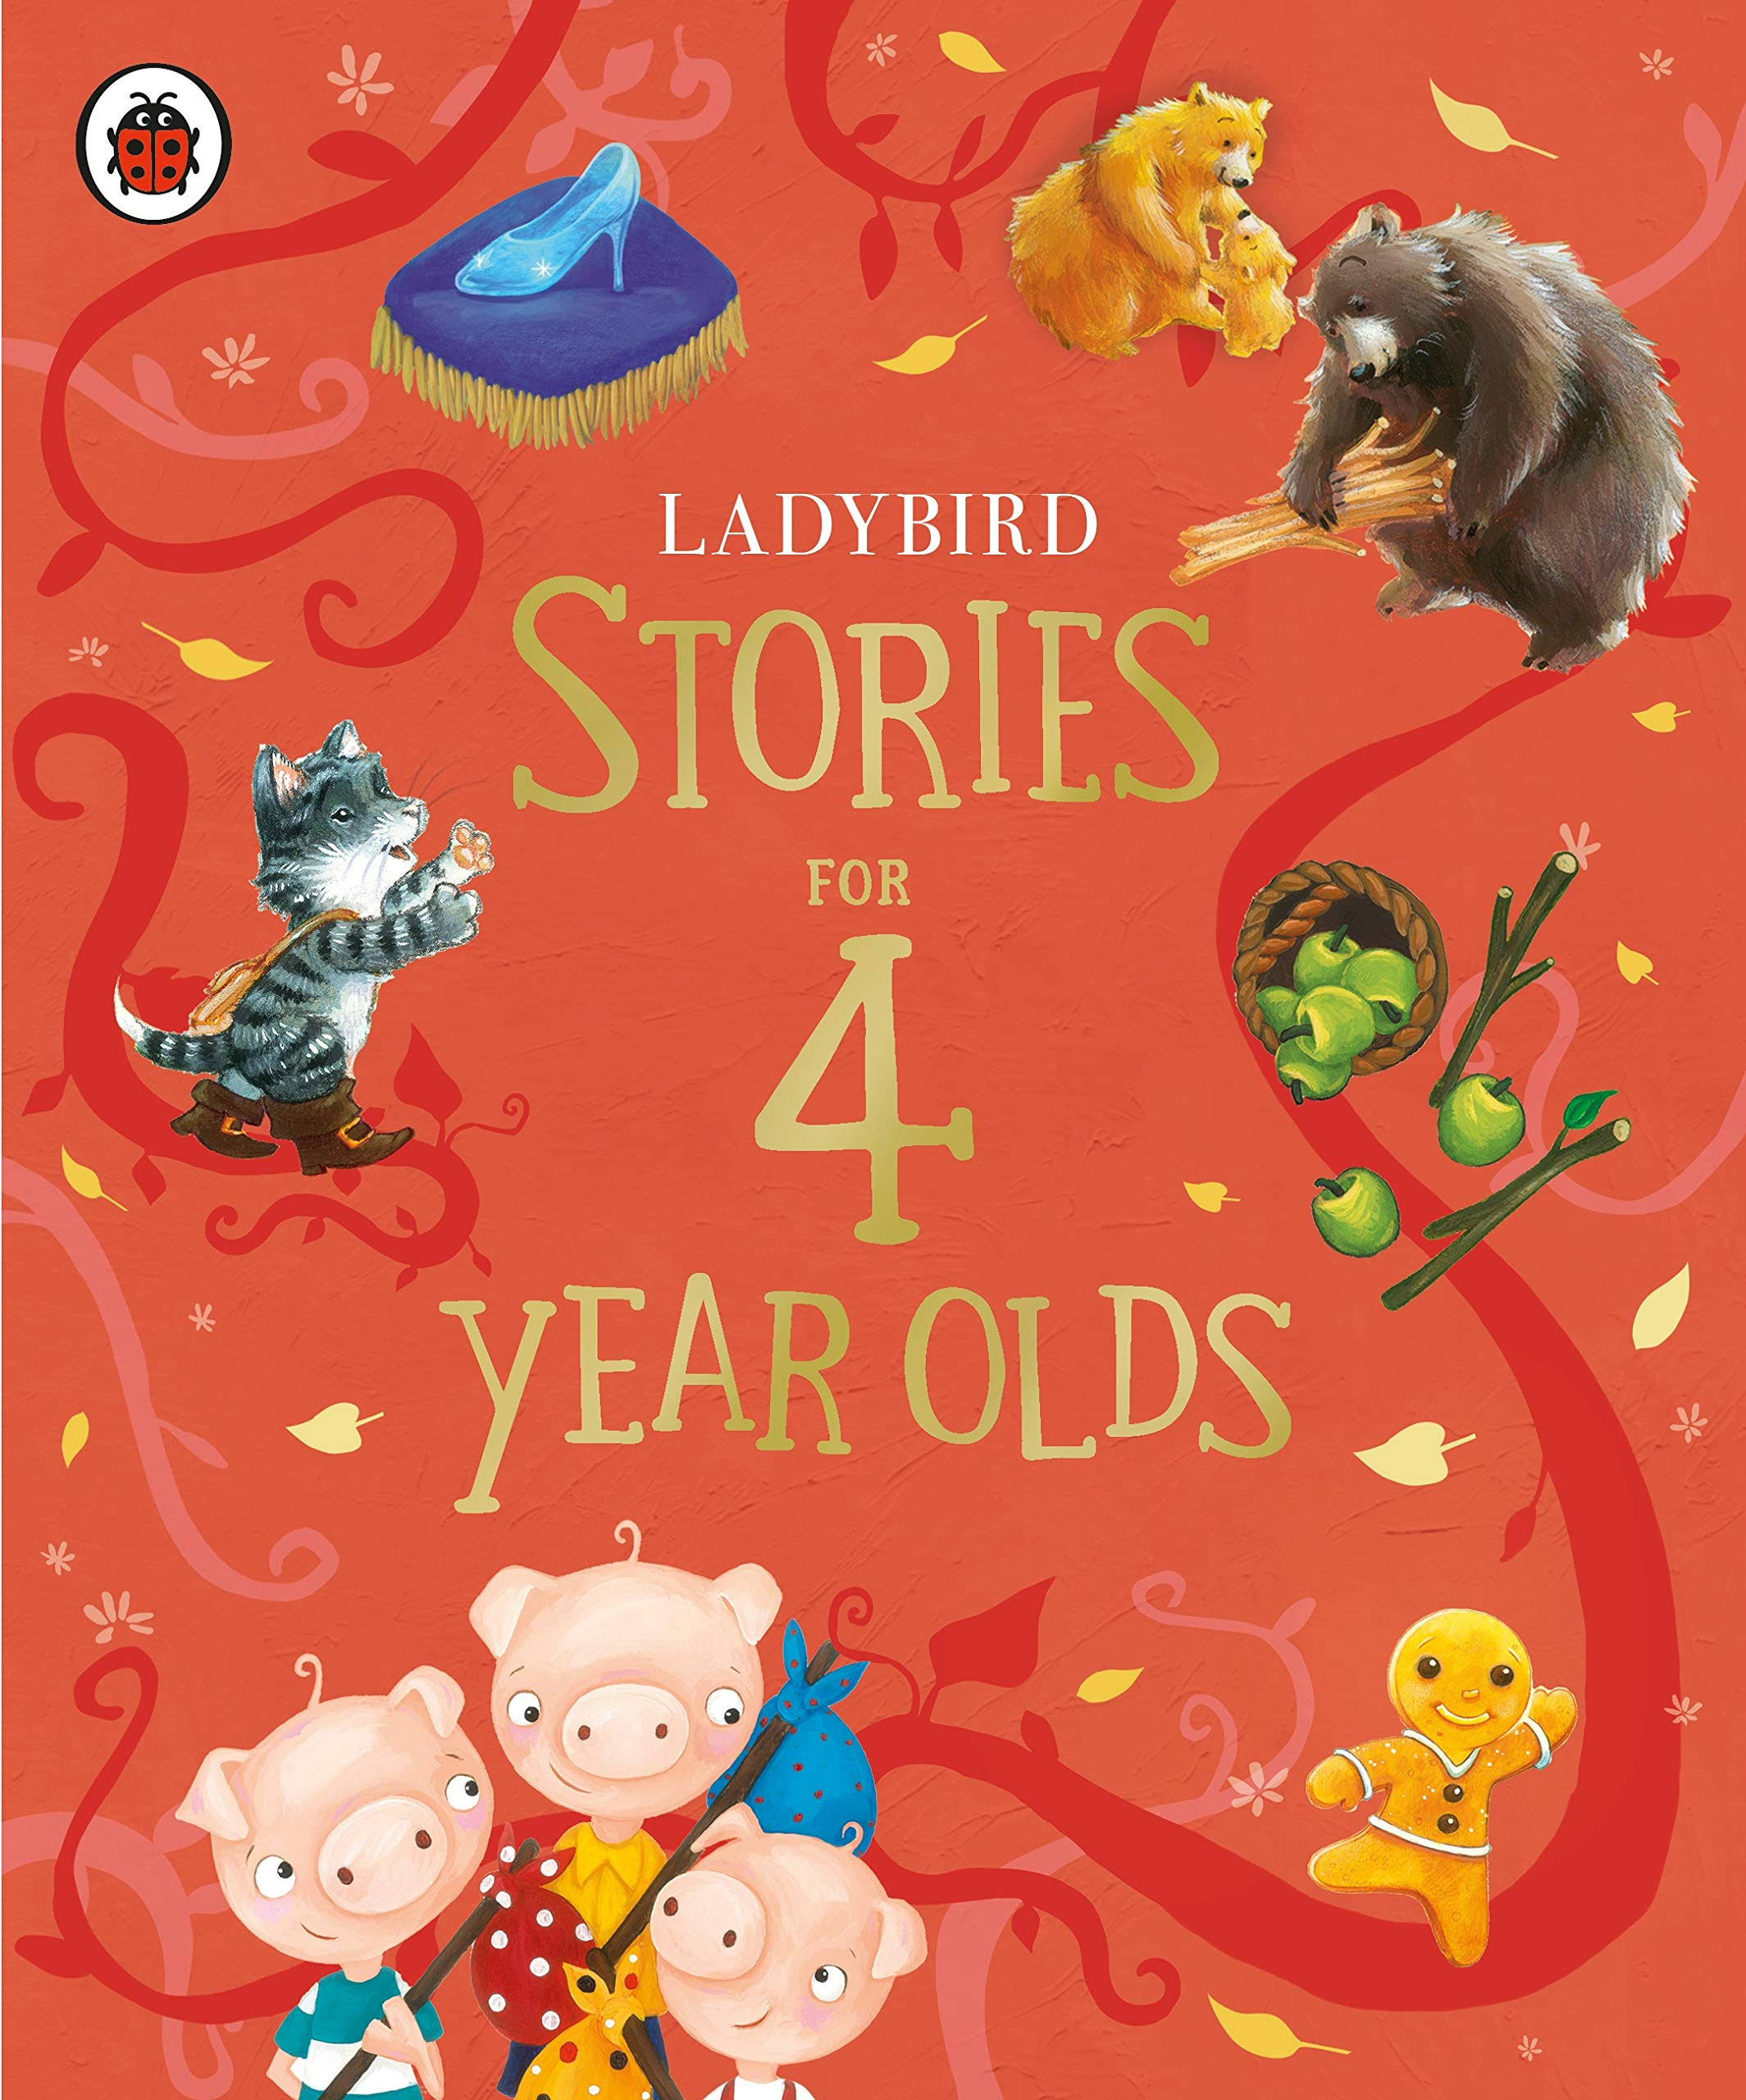 Ladybird Stories for Four Year Olds